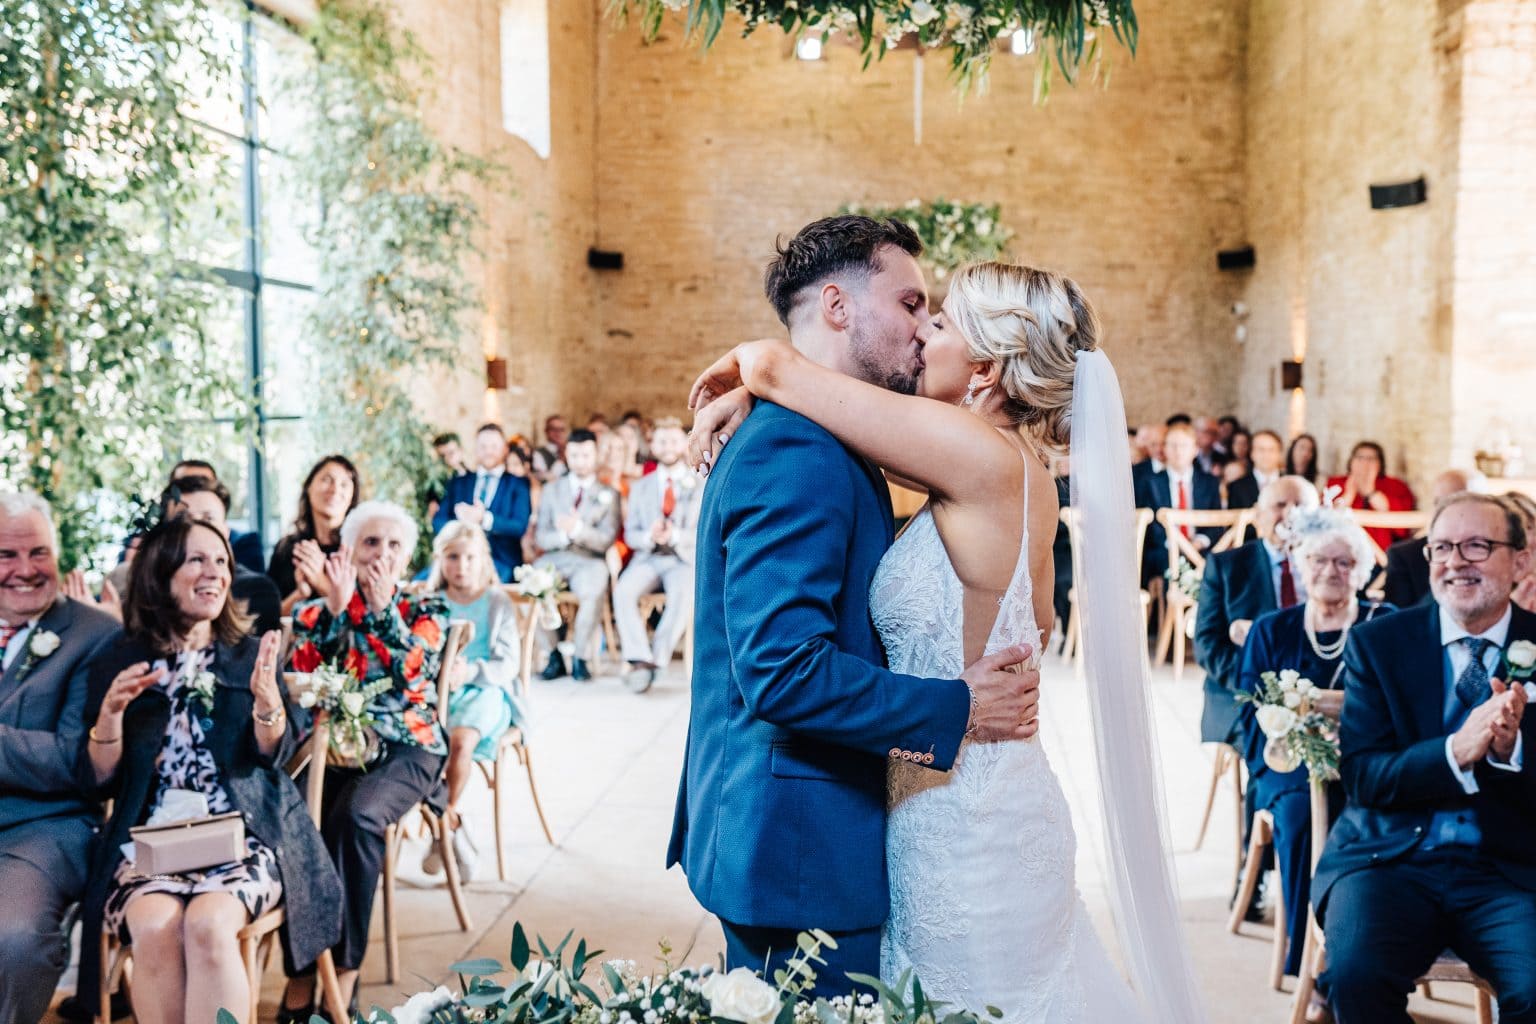 "Just married" and a "you may kiss the bride" as couple embrace for their first kiss as a married couple at Old Gore Barn by Yard Space In Cirencester